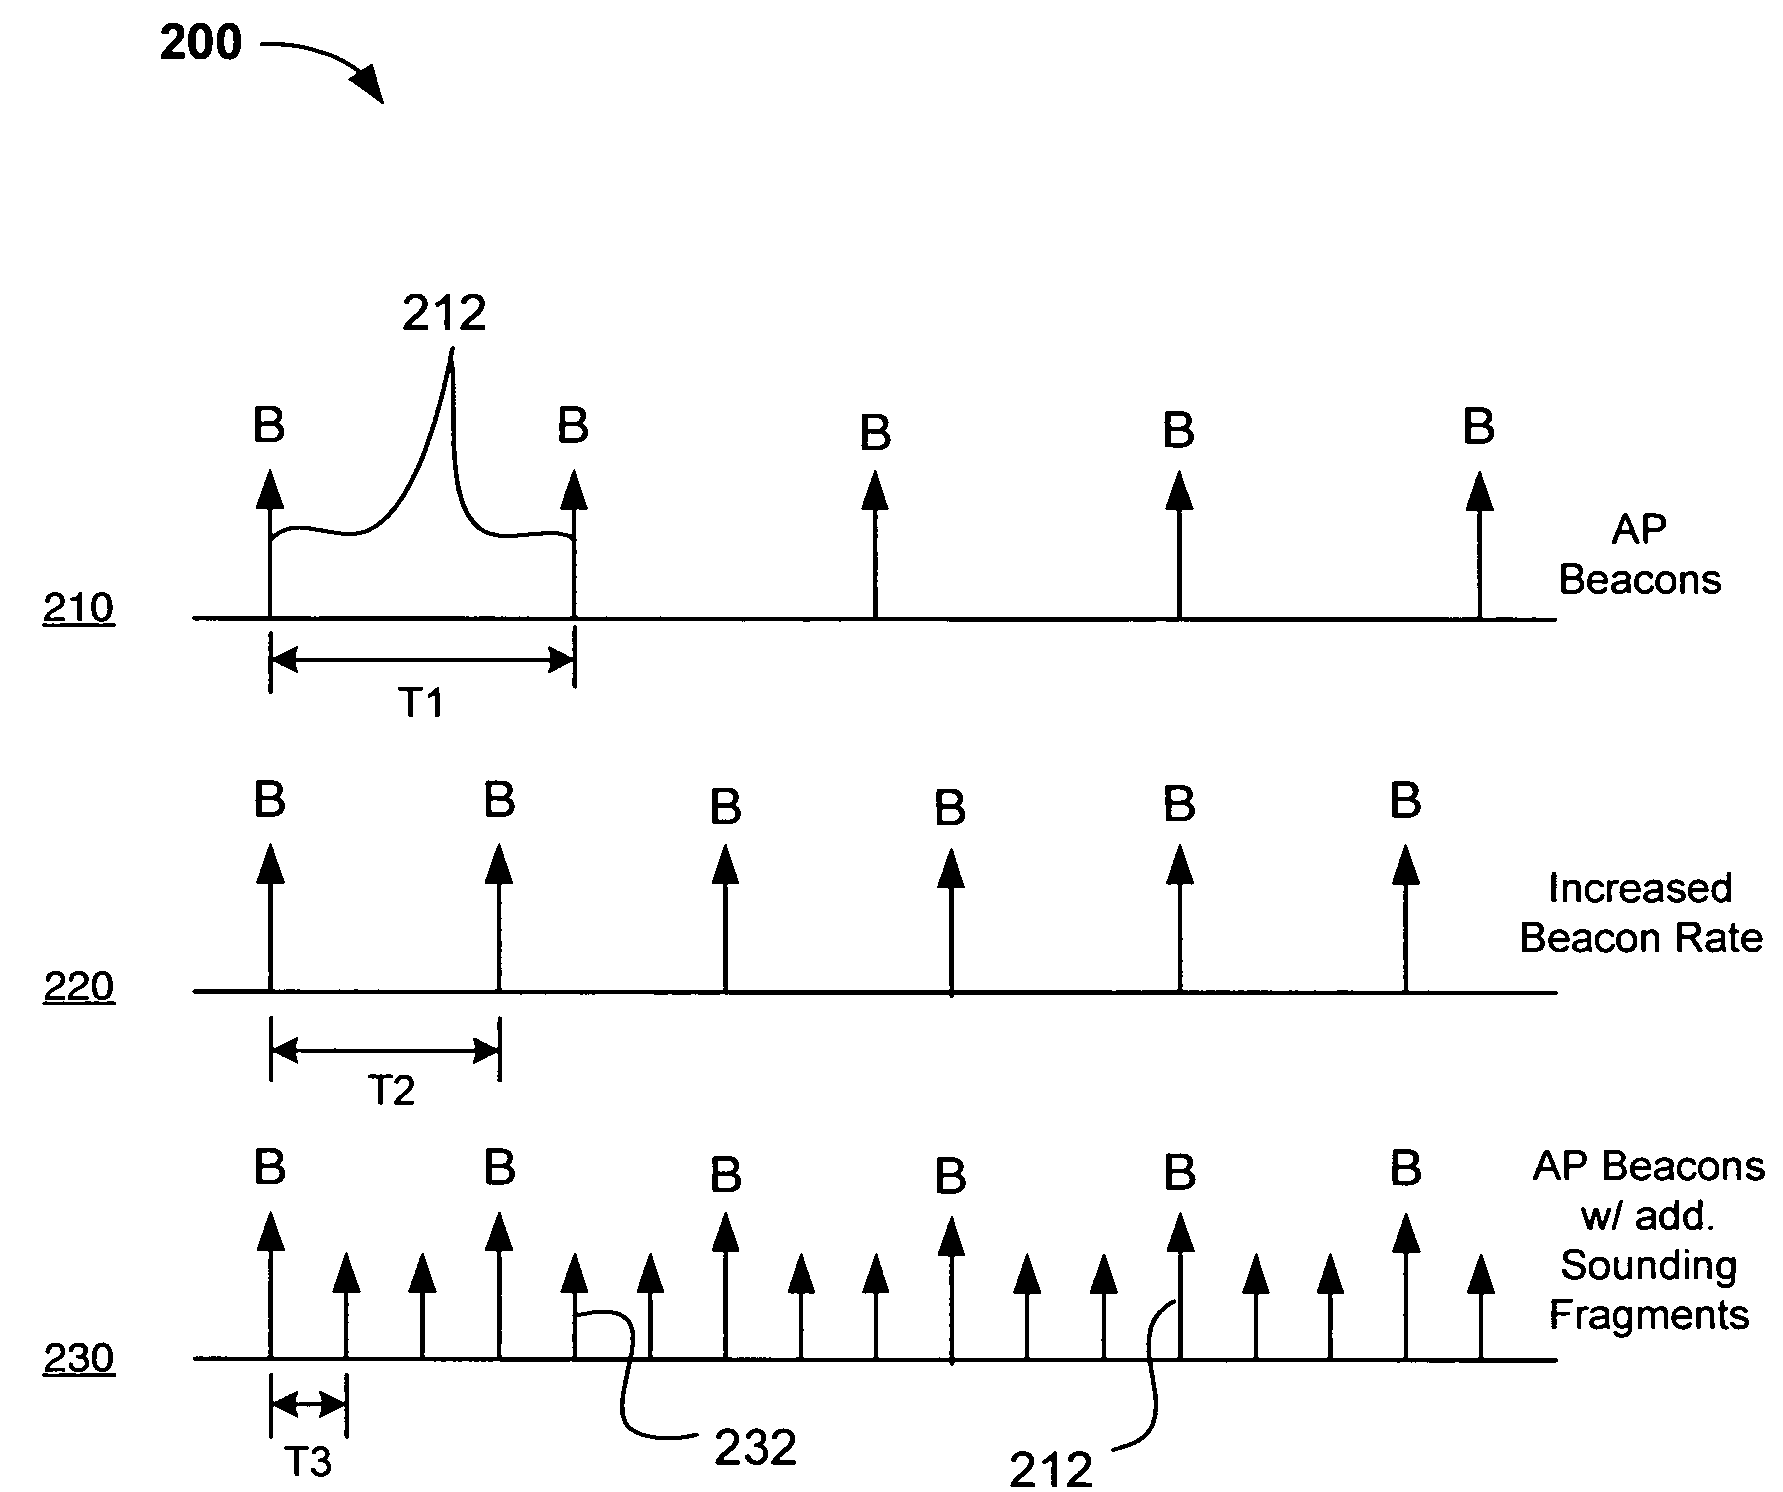 Channel adaptation using variable sounding signal rates